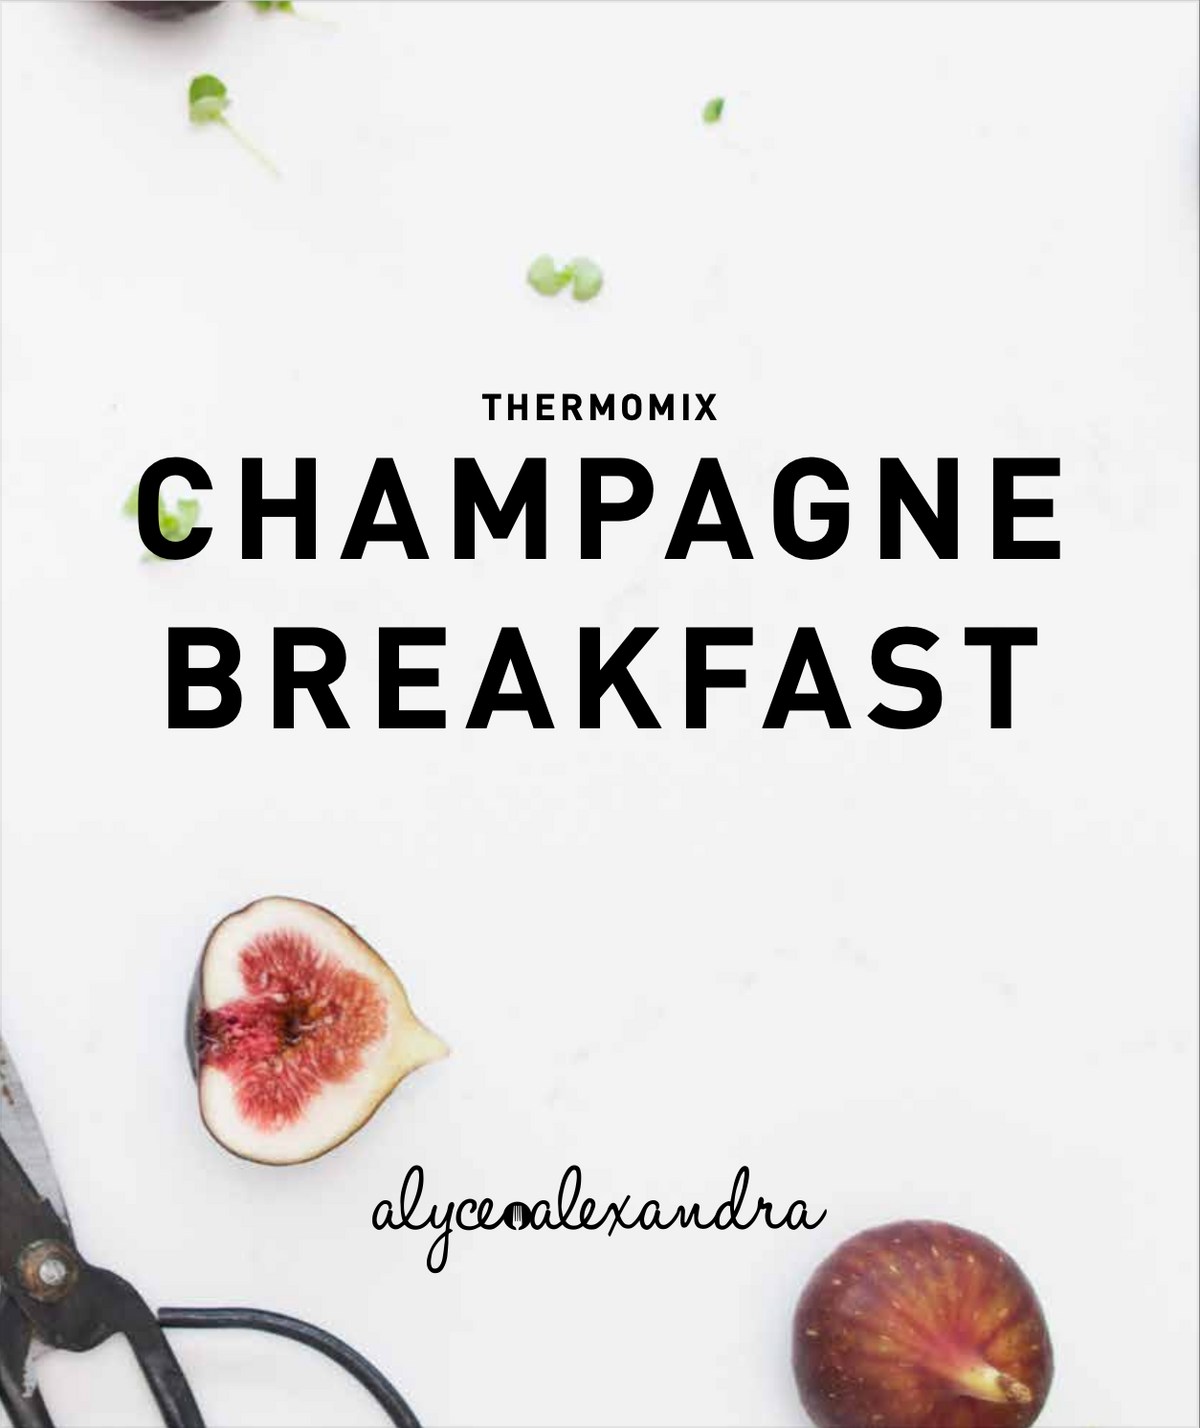 Champagne Breakfast Class Booklet for Thermomix Machines | Digital Cookbook